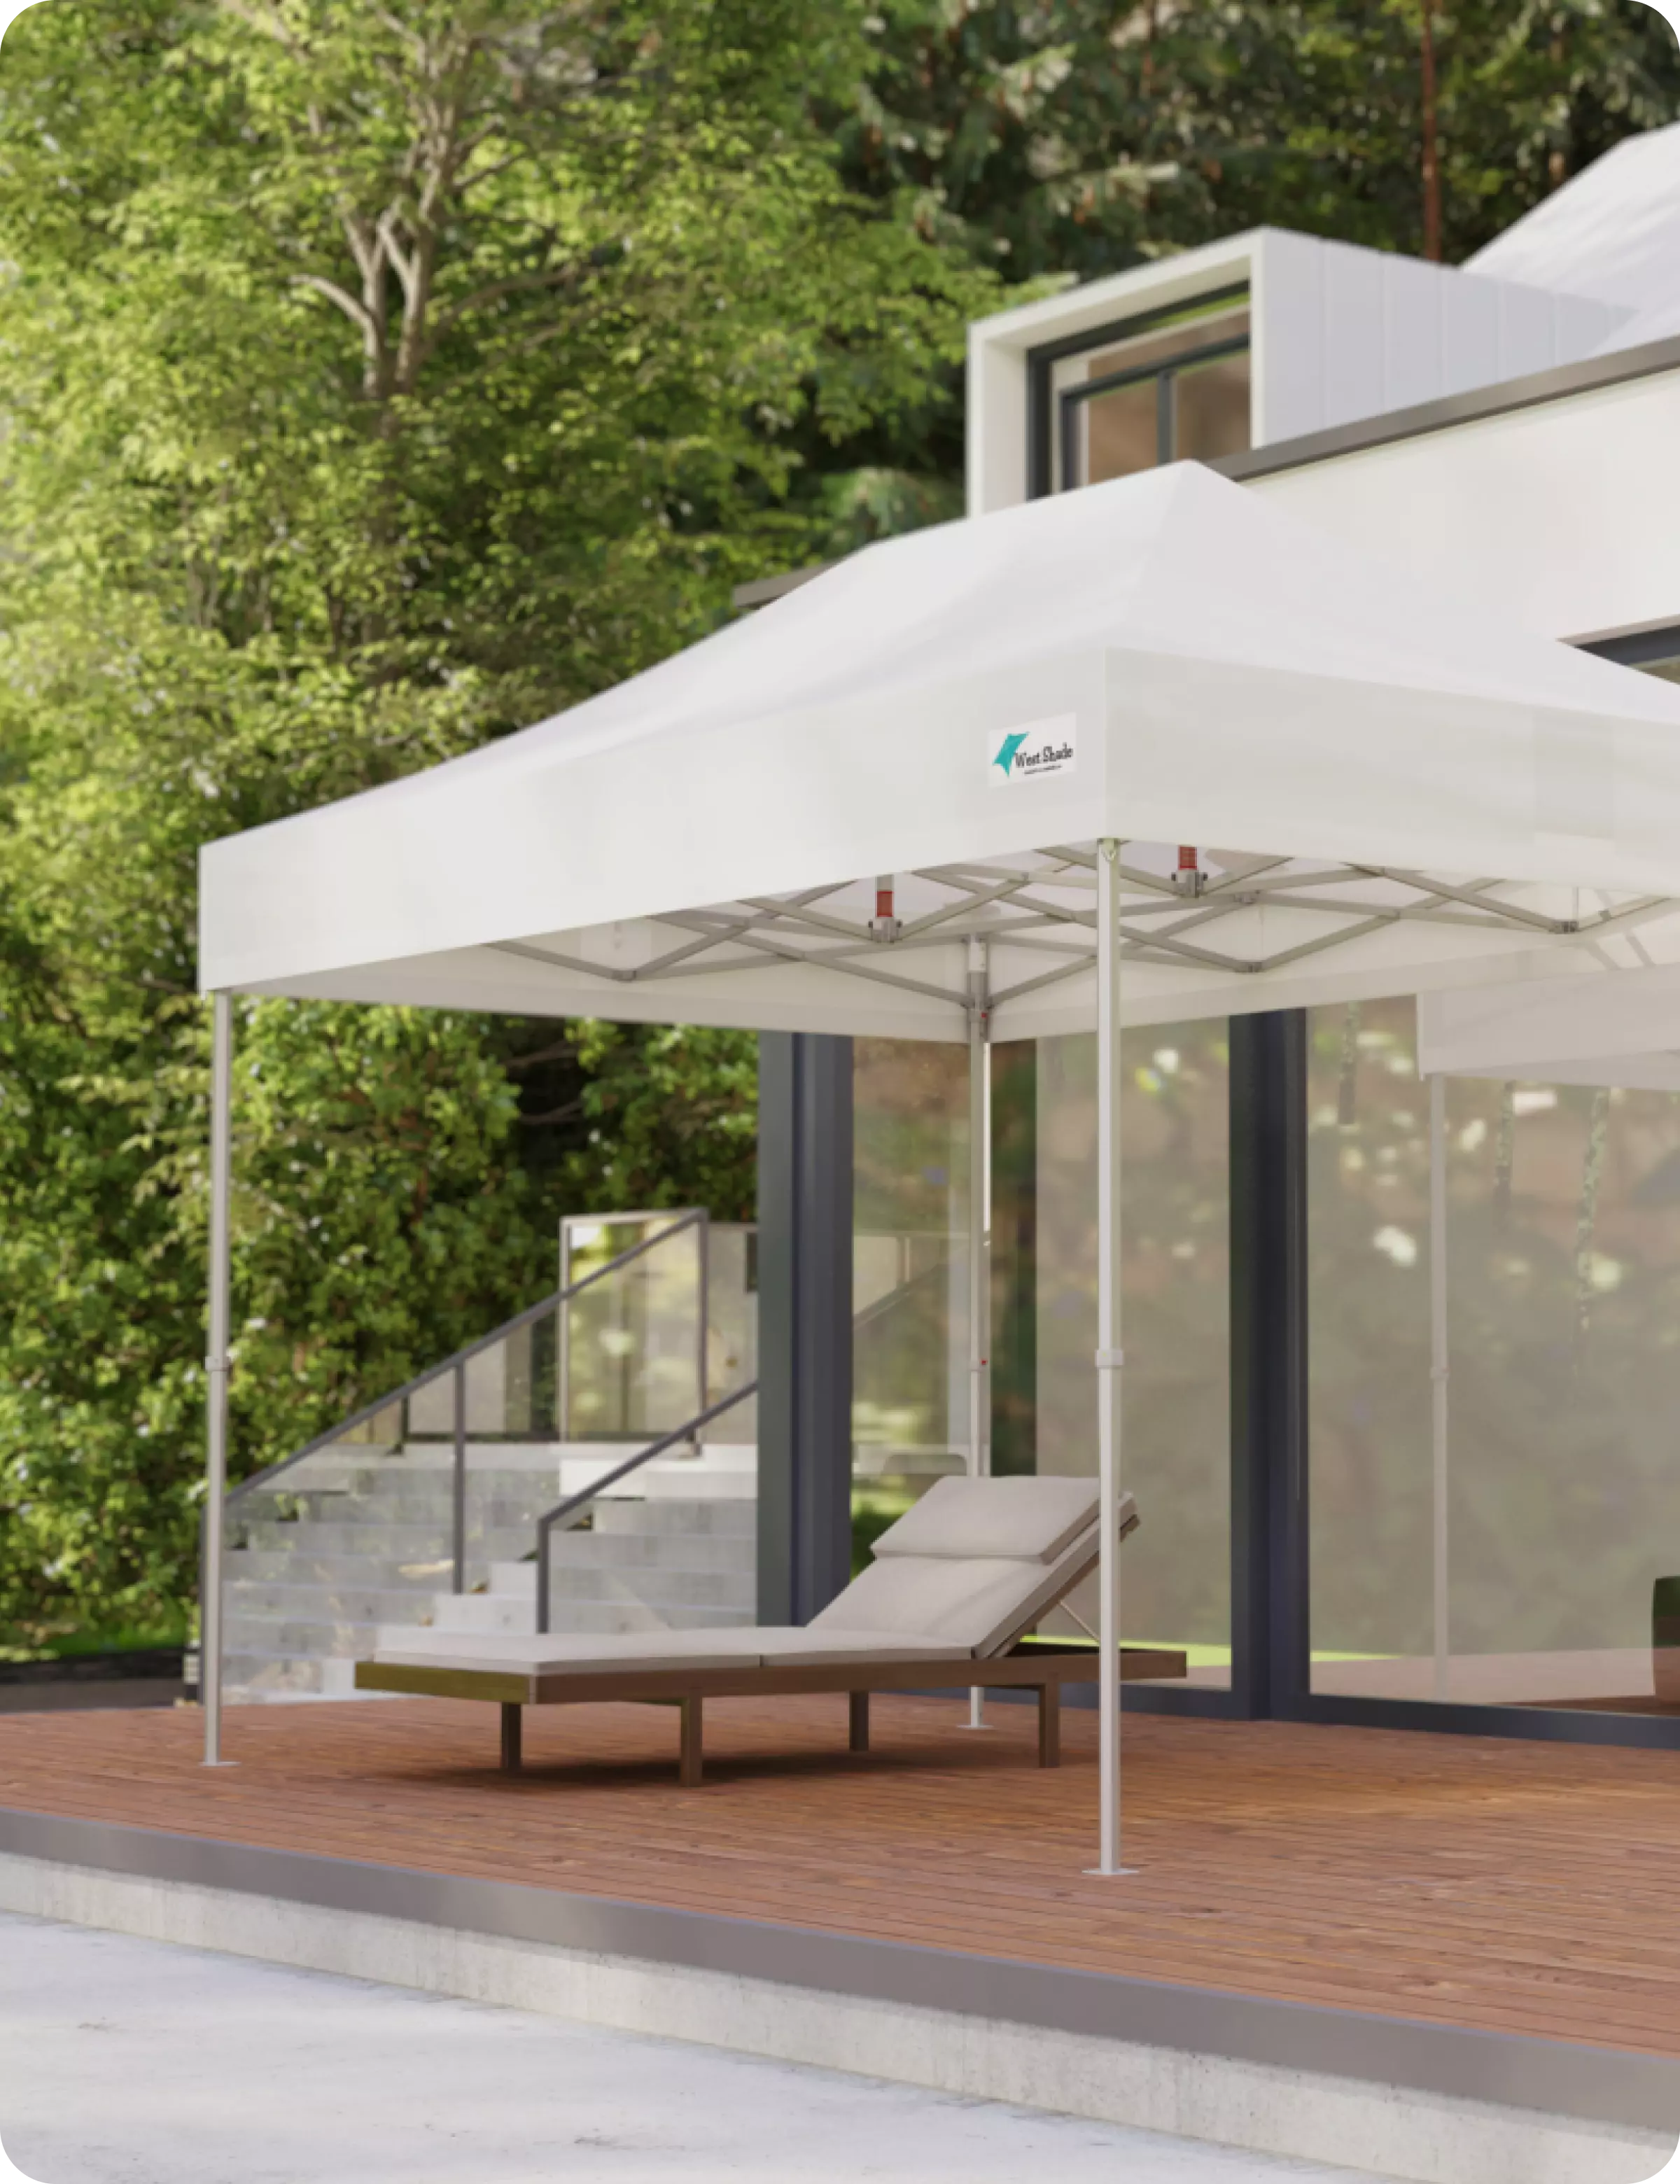 White canopy tent at home, backyard, or near the pool